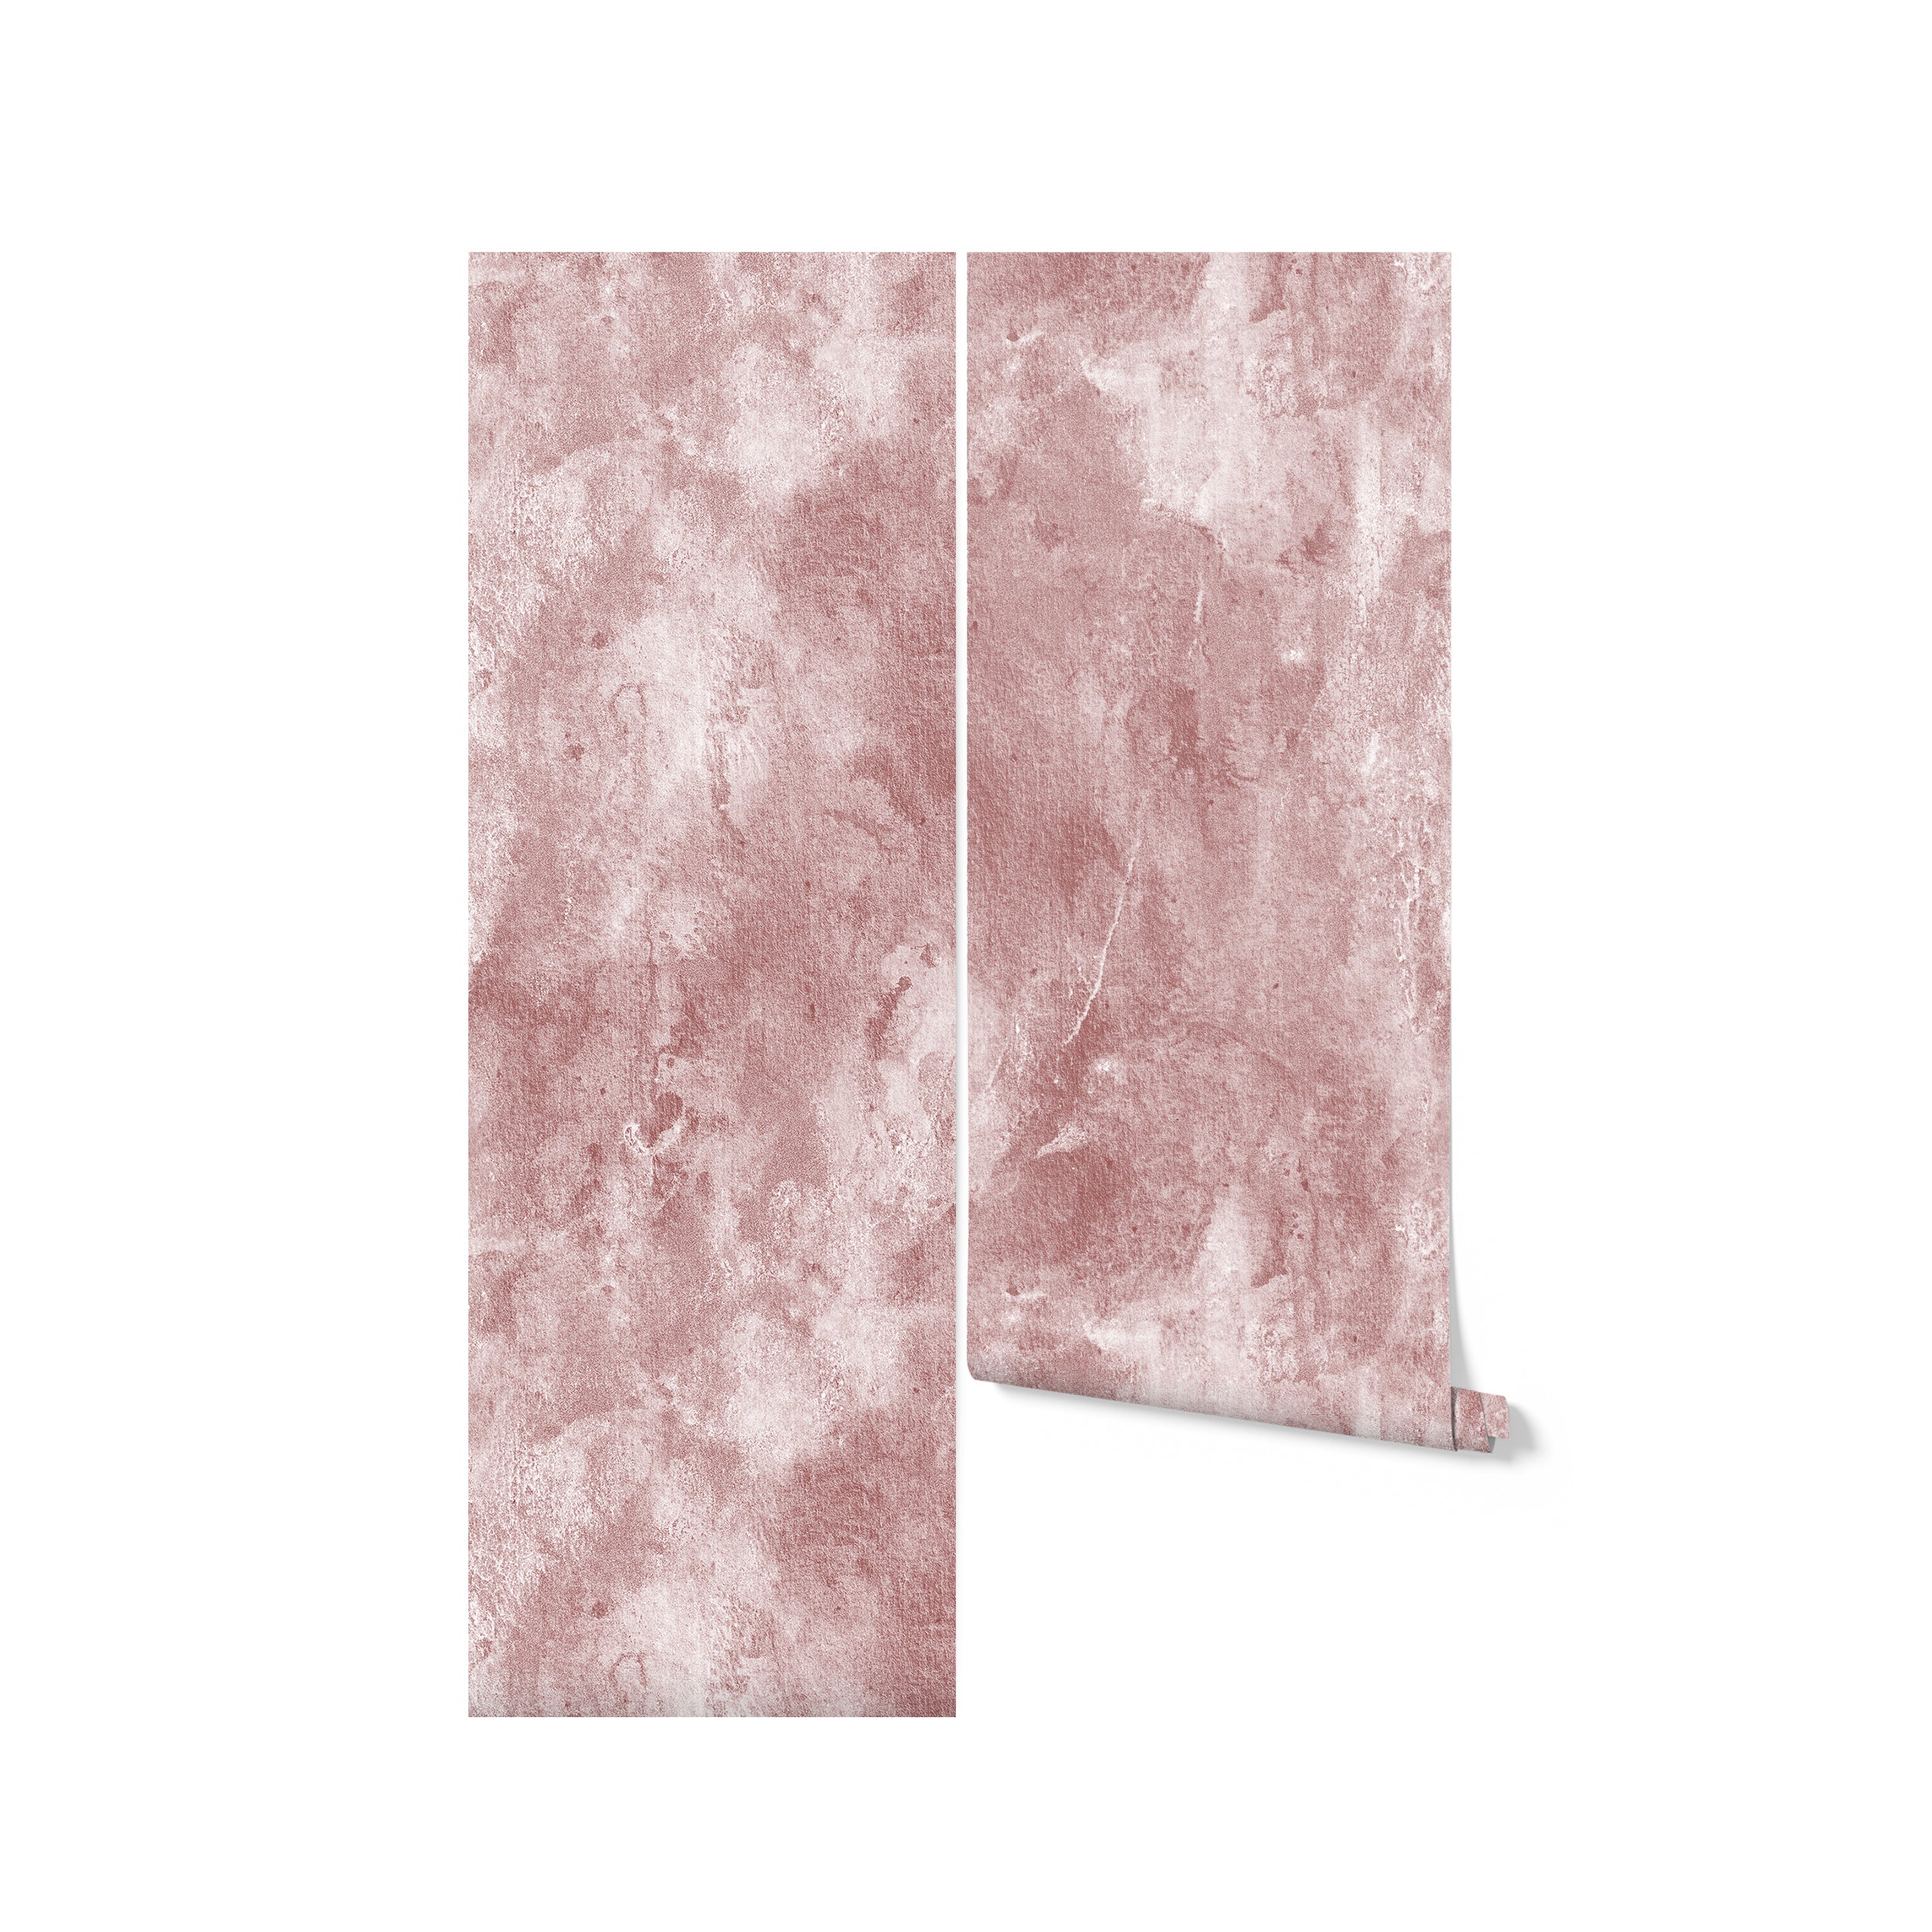 Two panels of the Dusty Rose Limewash Wallpaper, with one panel partially unrolled, revealing the texture and color gradient. The wallpaper's rich, earthy tone and tactile surface create a sense of depth and artistry.